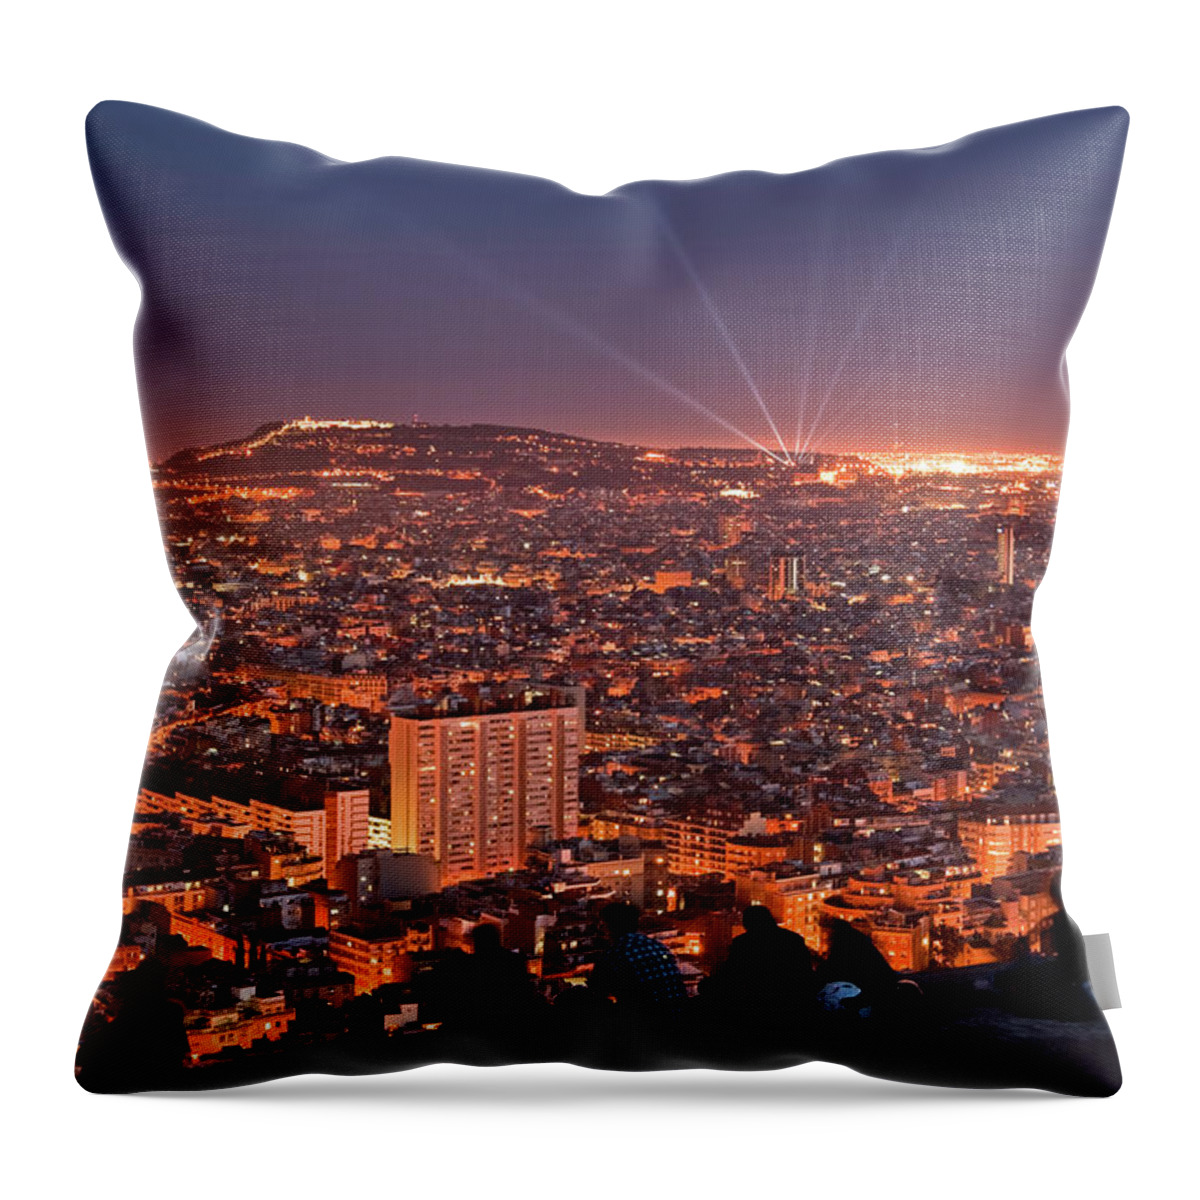 Catalonia Throw Pillow featuring the photograph Barcelona At Night With People by Artur Debat